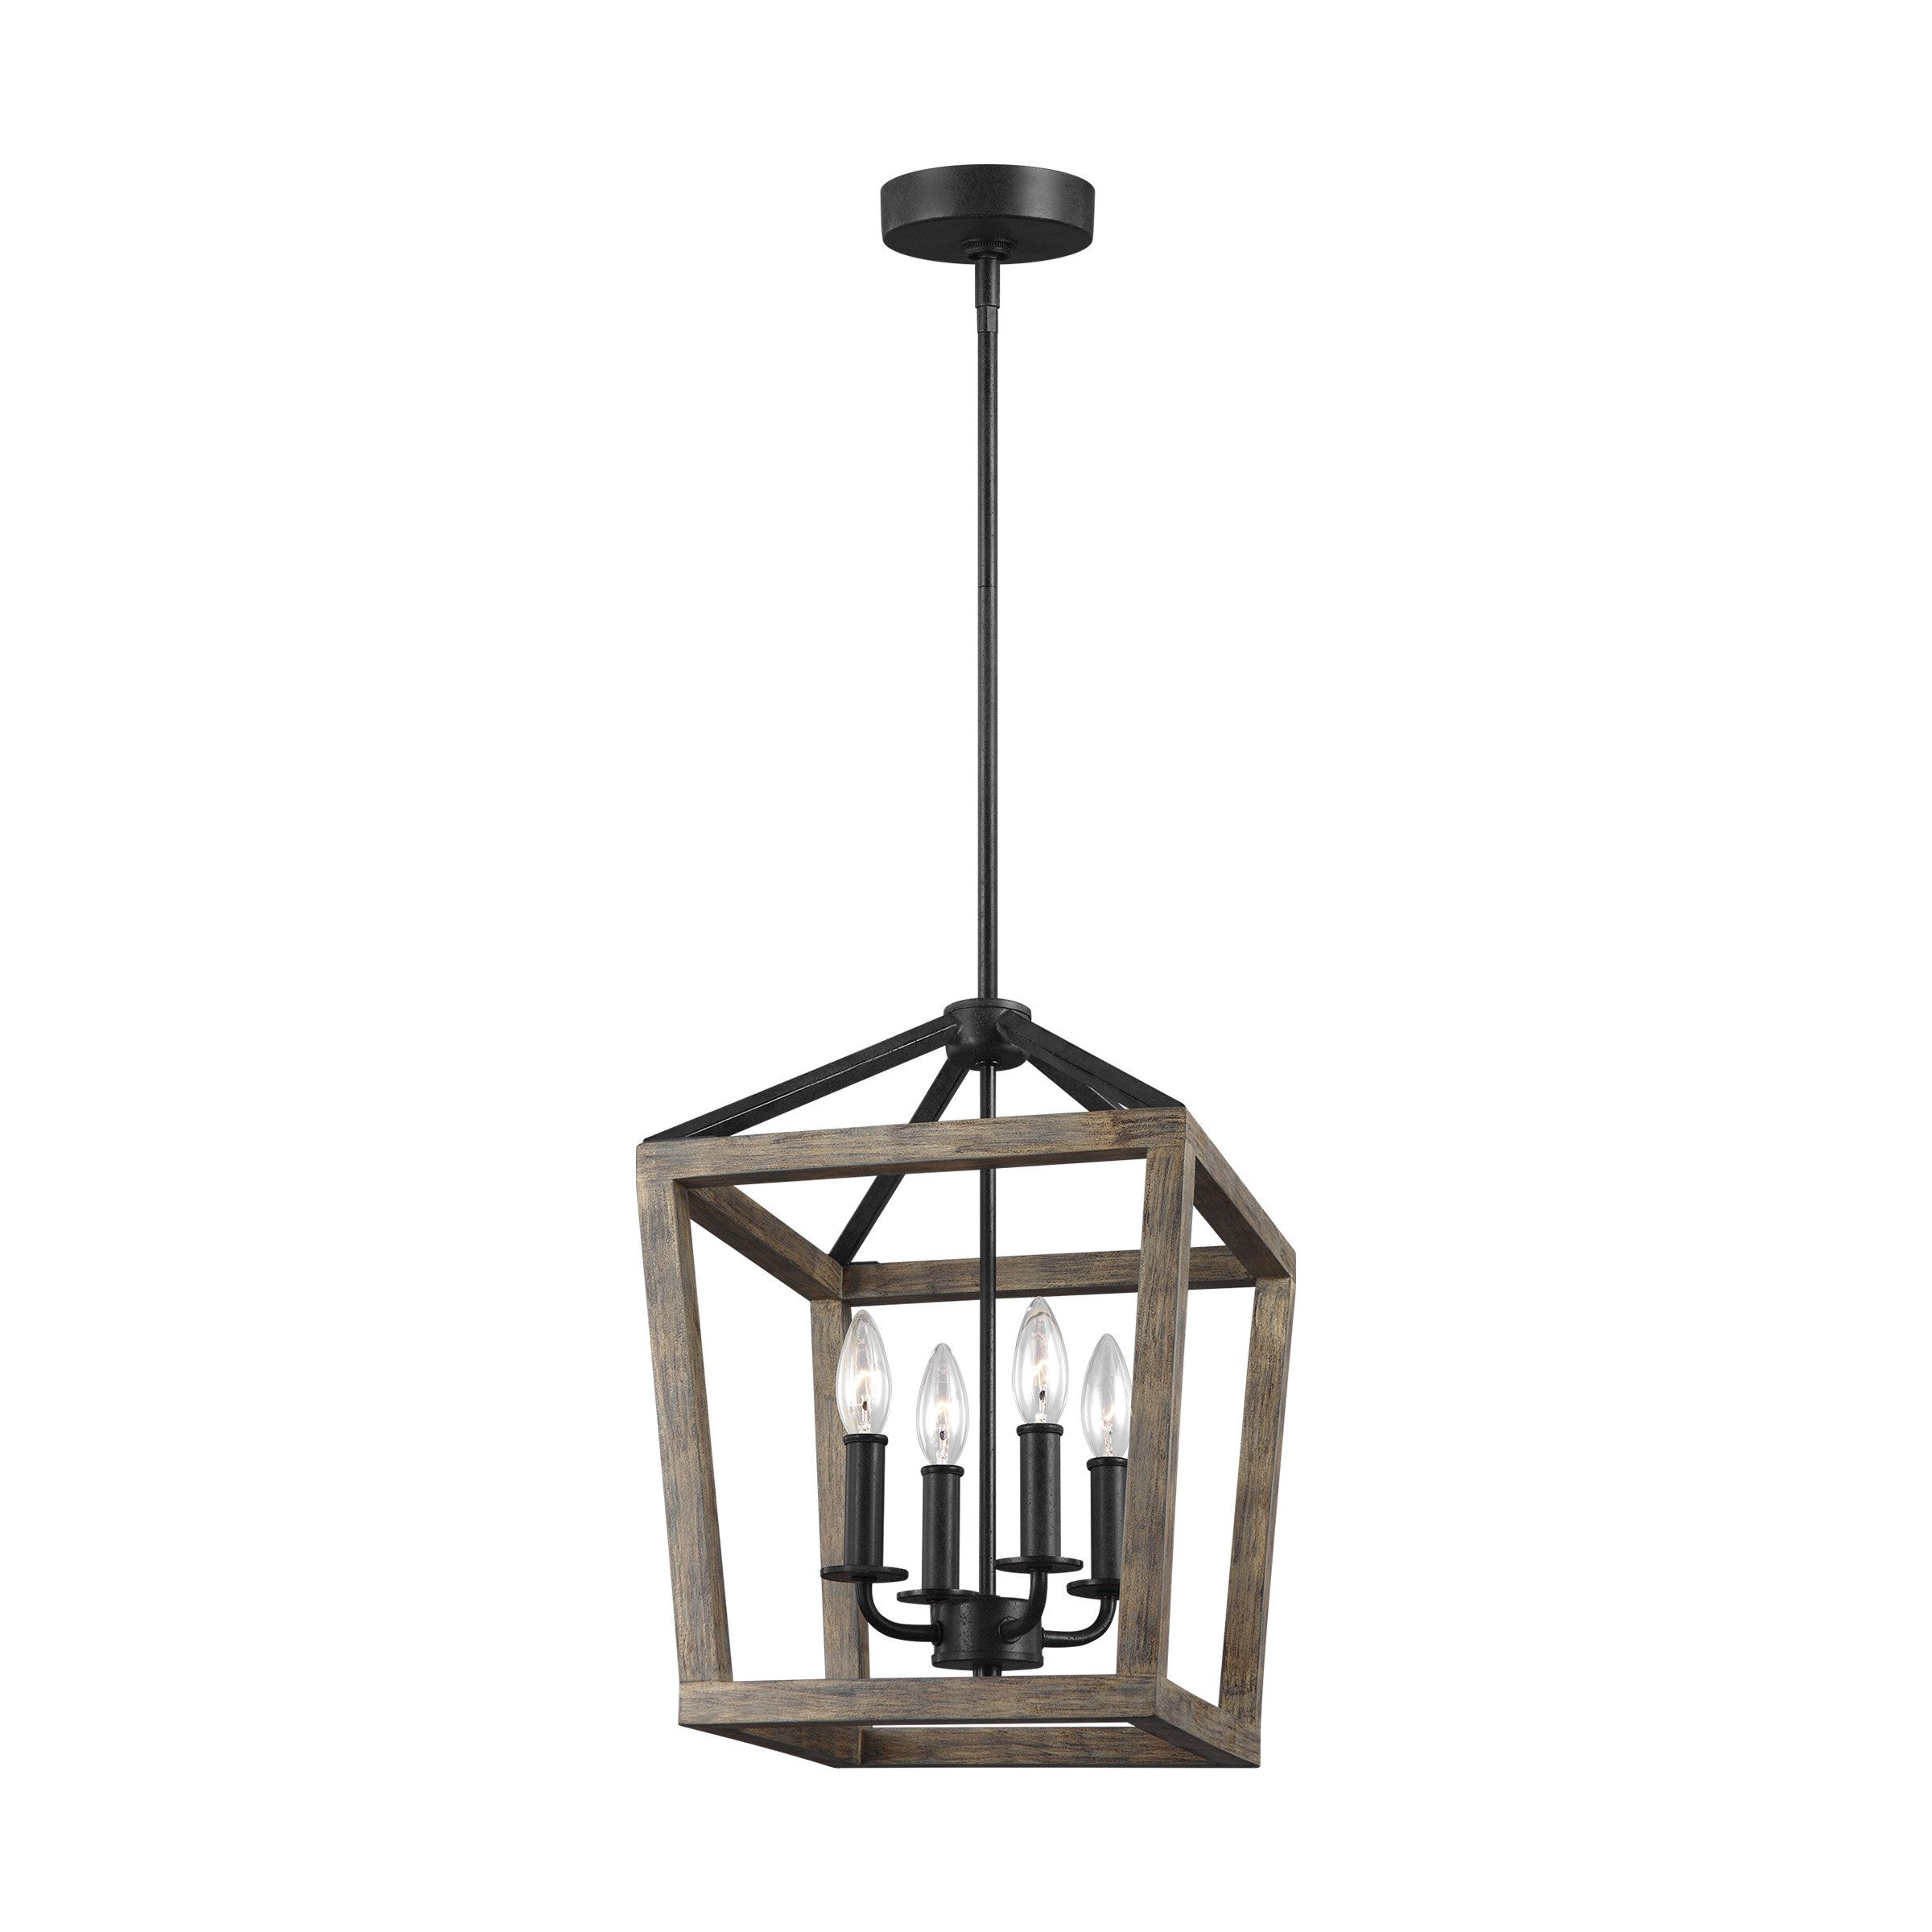 4 Light Lantern Square / Rectangle Pendant With Regard To 4 Light Lantern Square / Rectangle Pendants (View 1 of 30)